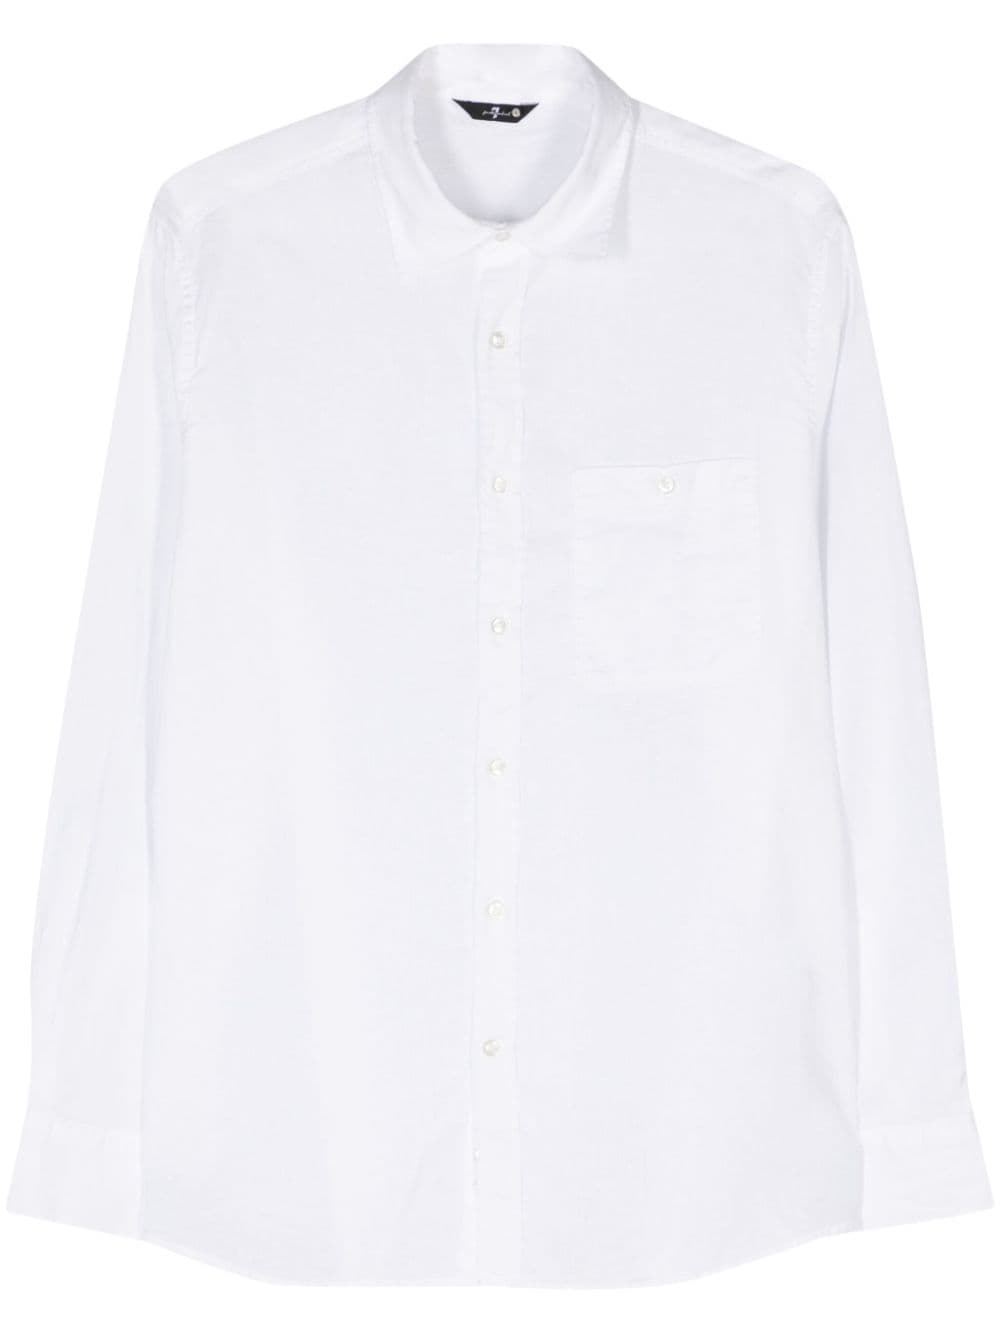 7 For All Mankind classic-collar long-sleeve shirt - White von 7 For All Mankind